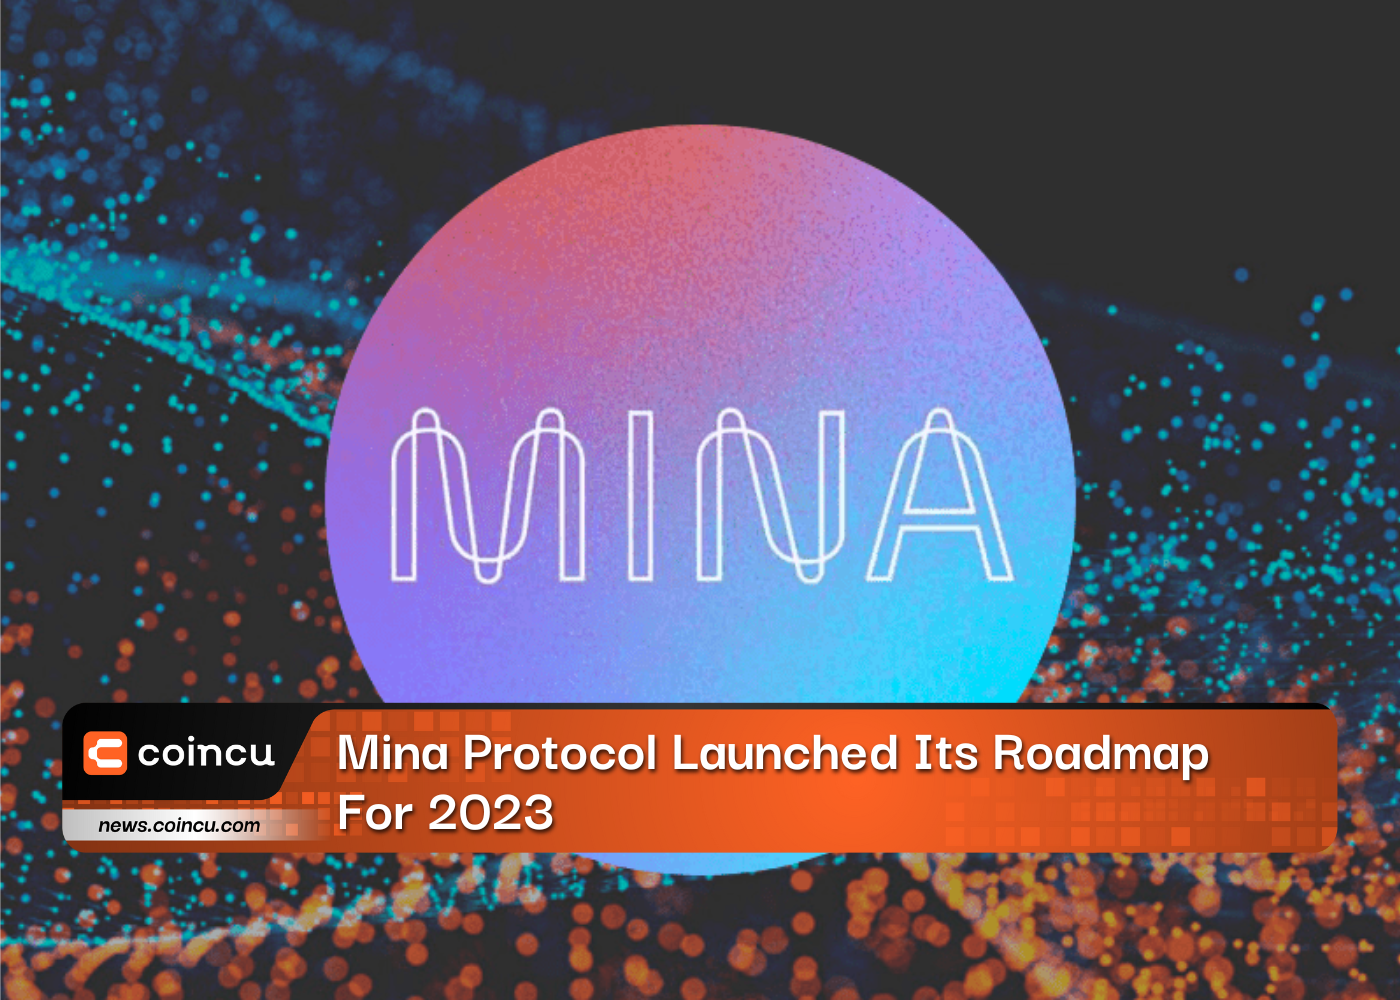 Mina Protocol Launched Its Roadmap For 2023